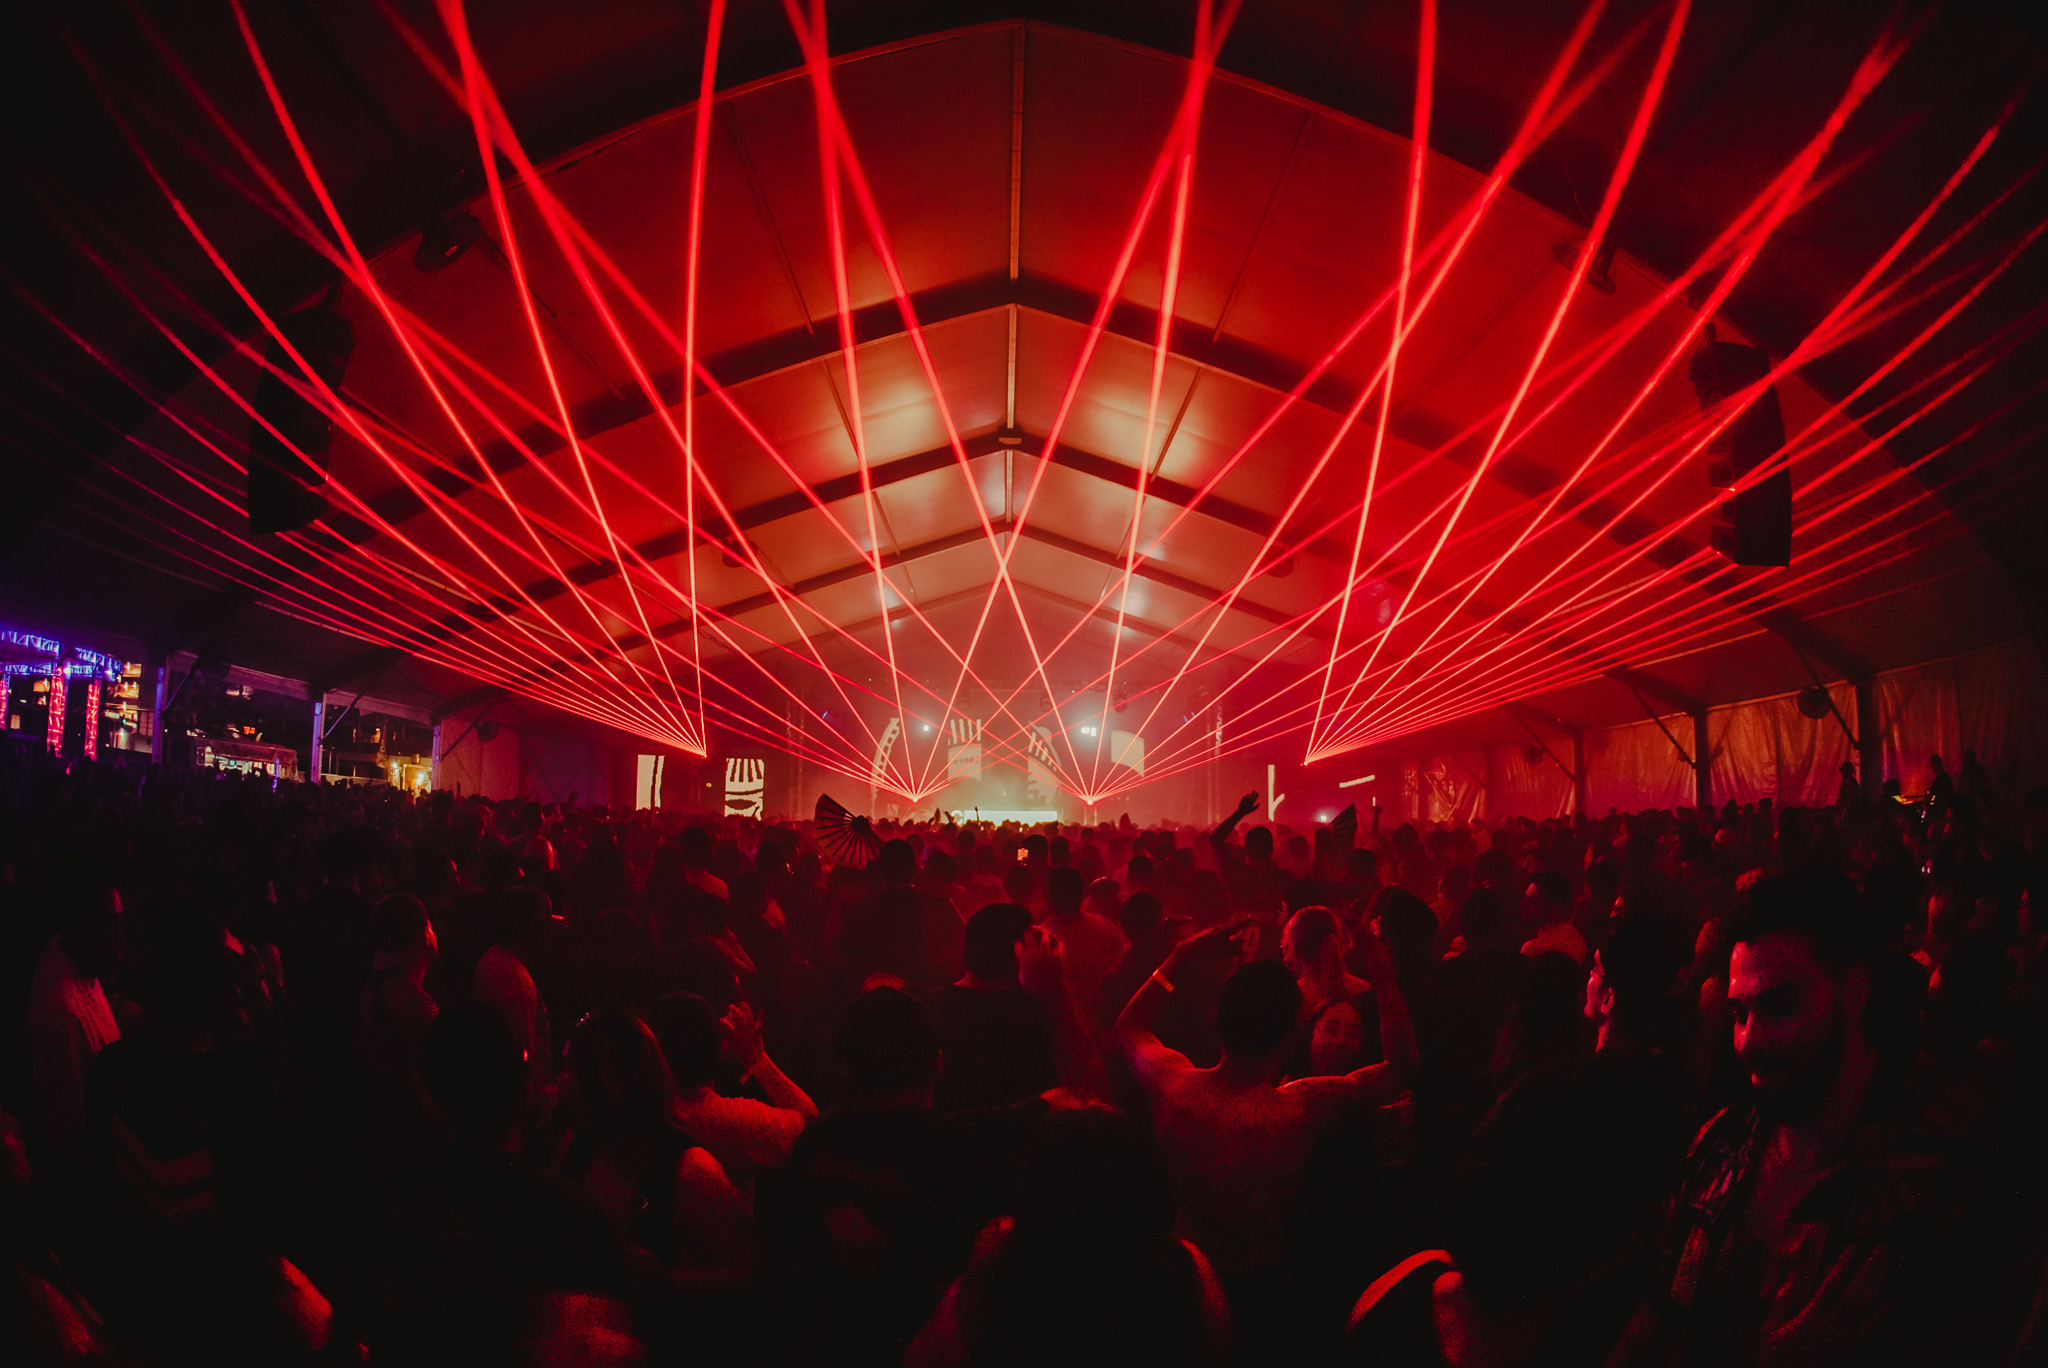 Red lasers fill the tent during the event.